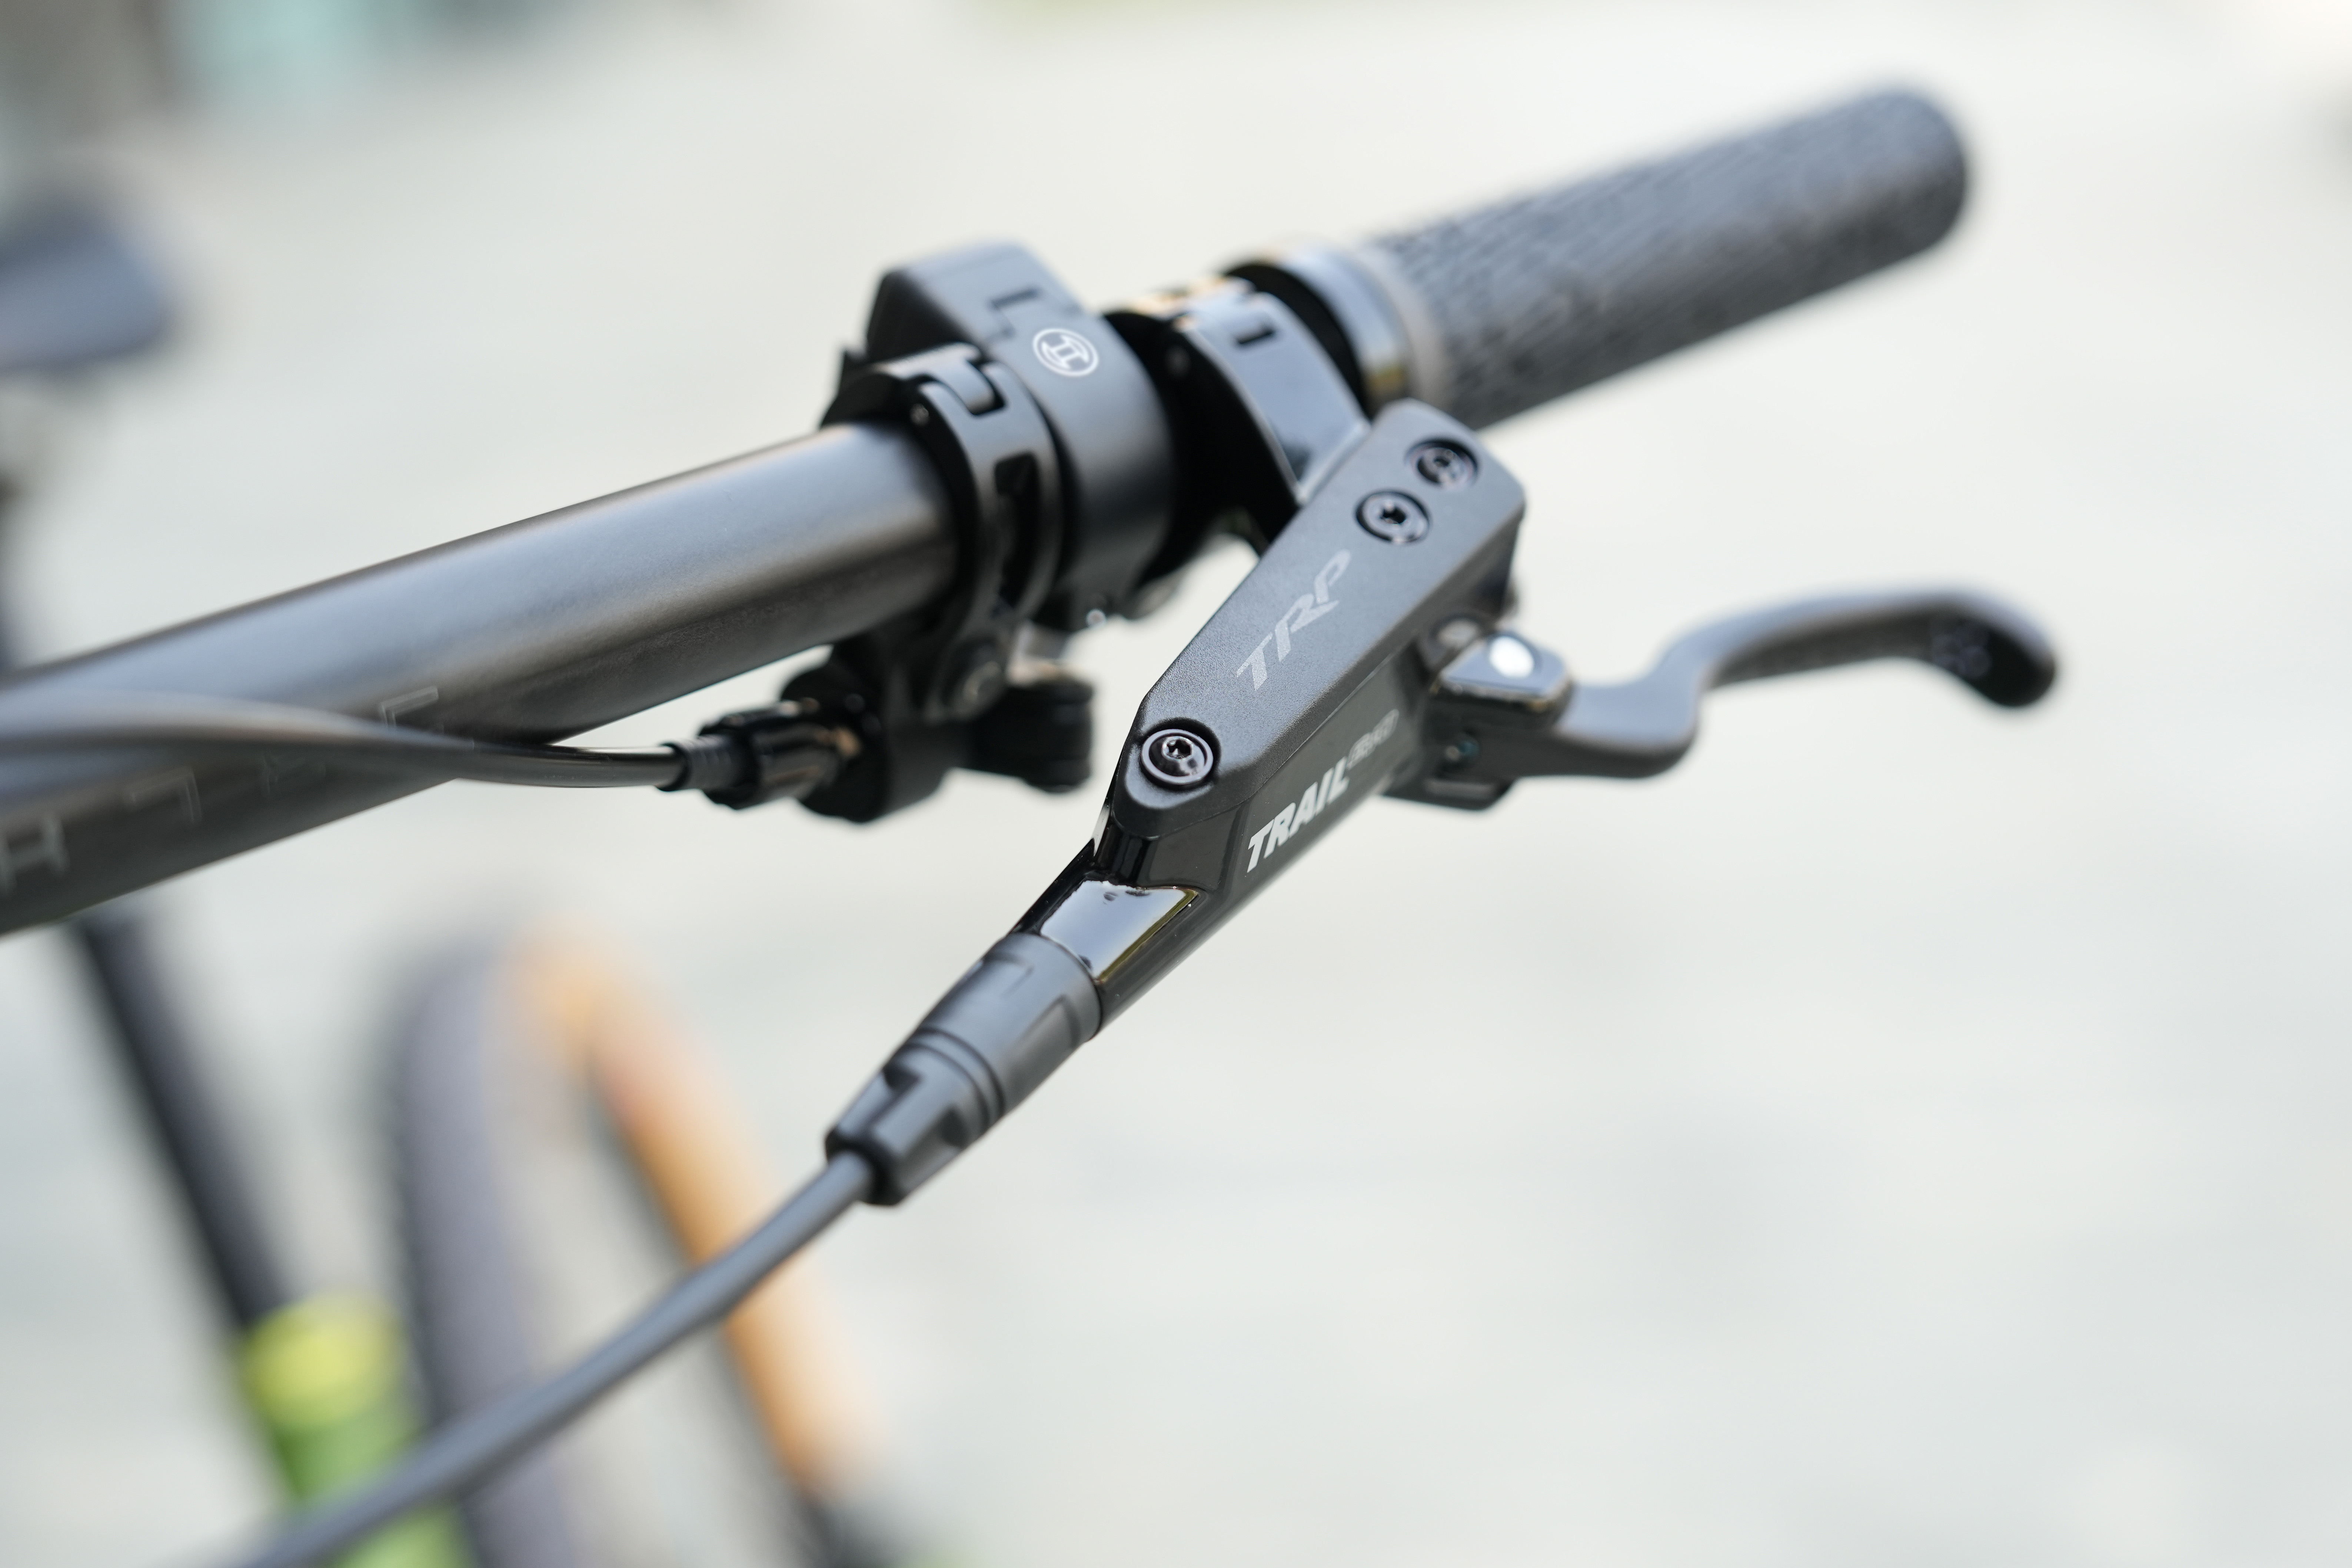 The braking systems of the sporty Tektro brand TRP are also compatible with the Bosch eBike ABS.